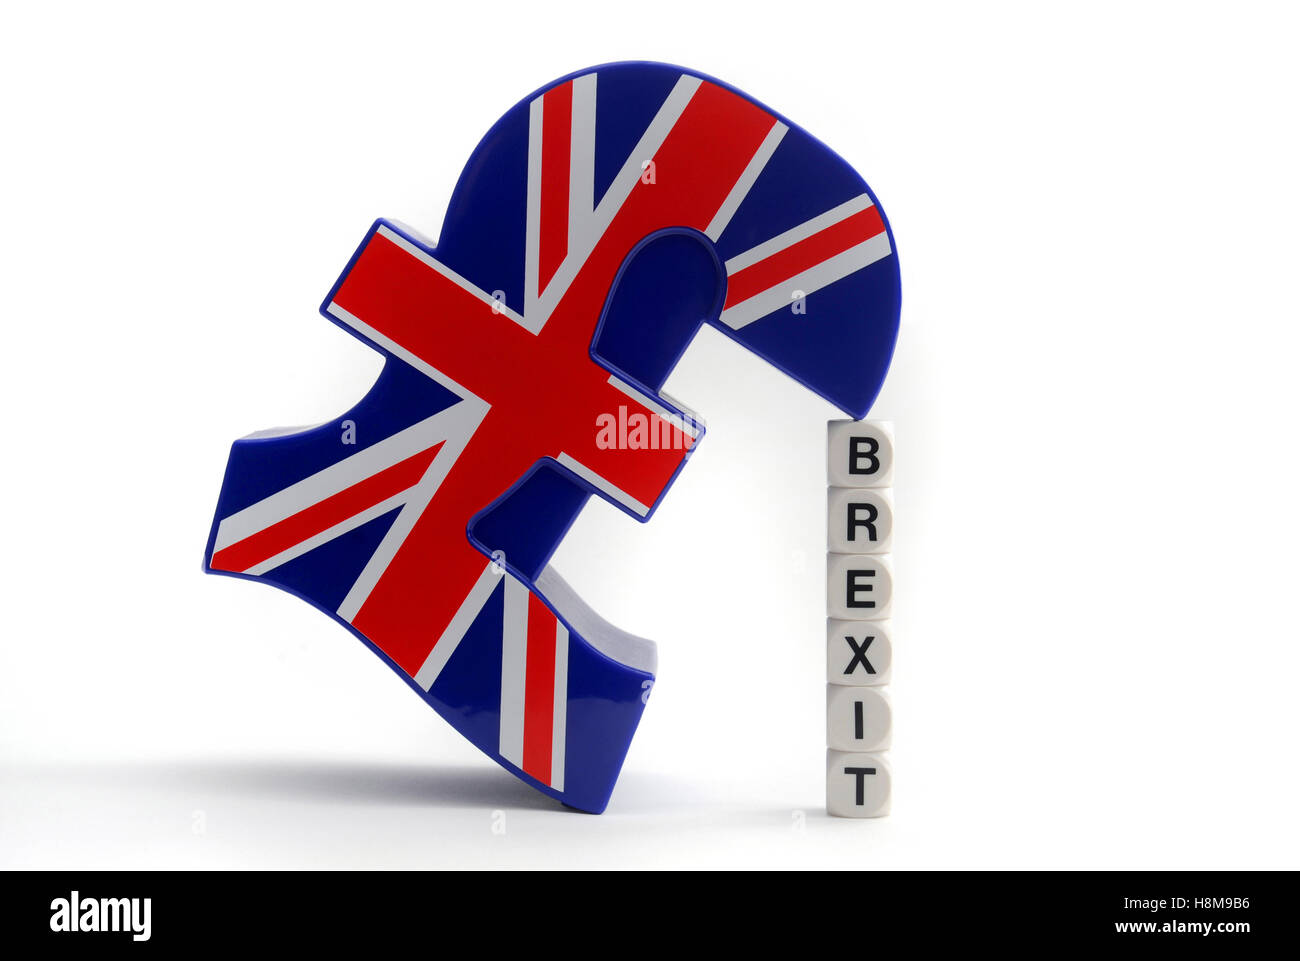 BRITISH POUND SIGN WITH WORD DICE SPELLING 'BREXIT' RE BREXIT THE EU LEAVING REFERENDUM VOTE THE EUROPEAN UNION LEAVE  GB UK Stock Photo